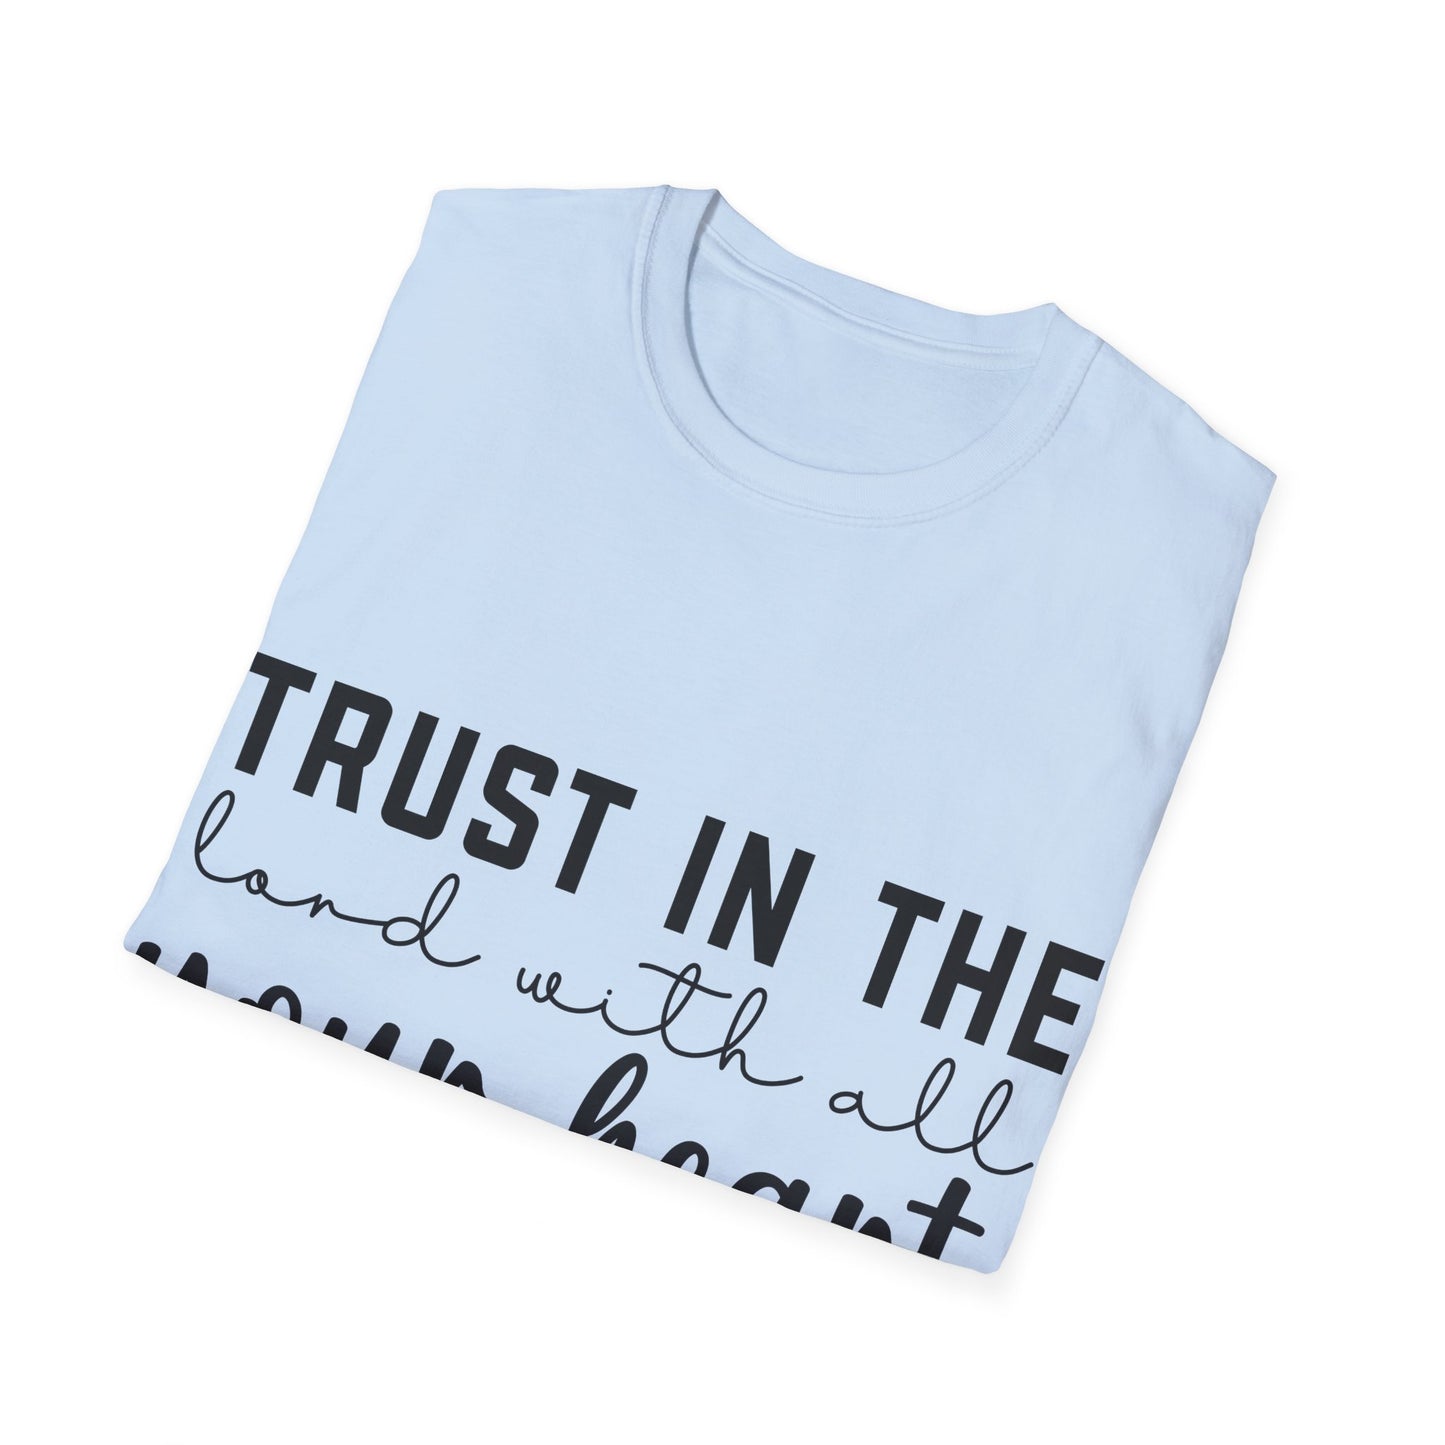 Trust In The Lord With All Your Heart Proverbs 3:5 Triple Viking T-Shirt